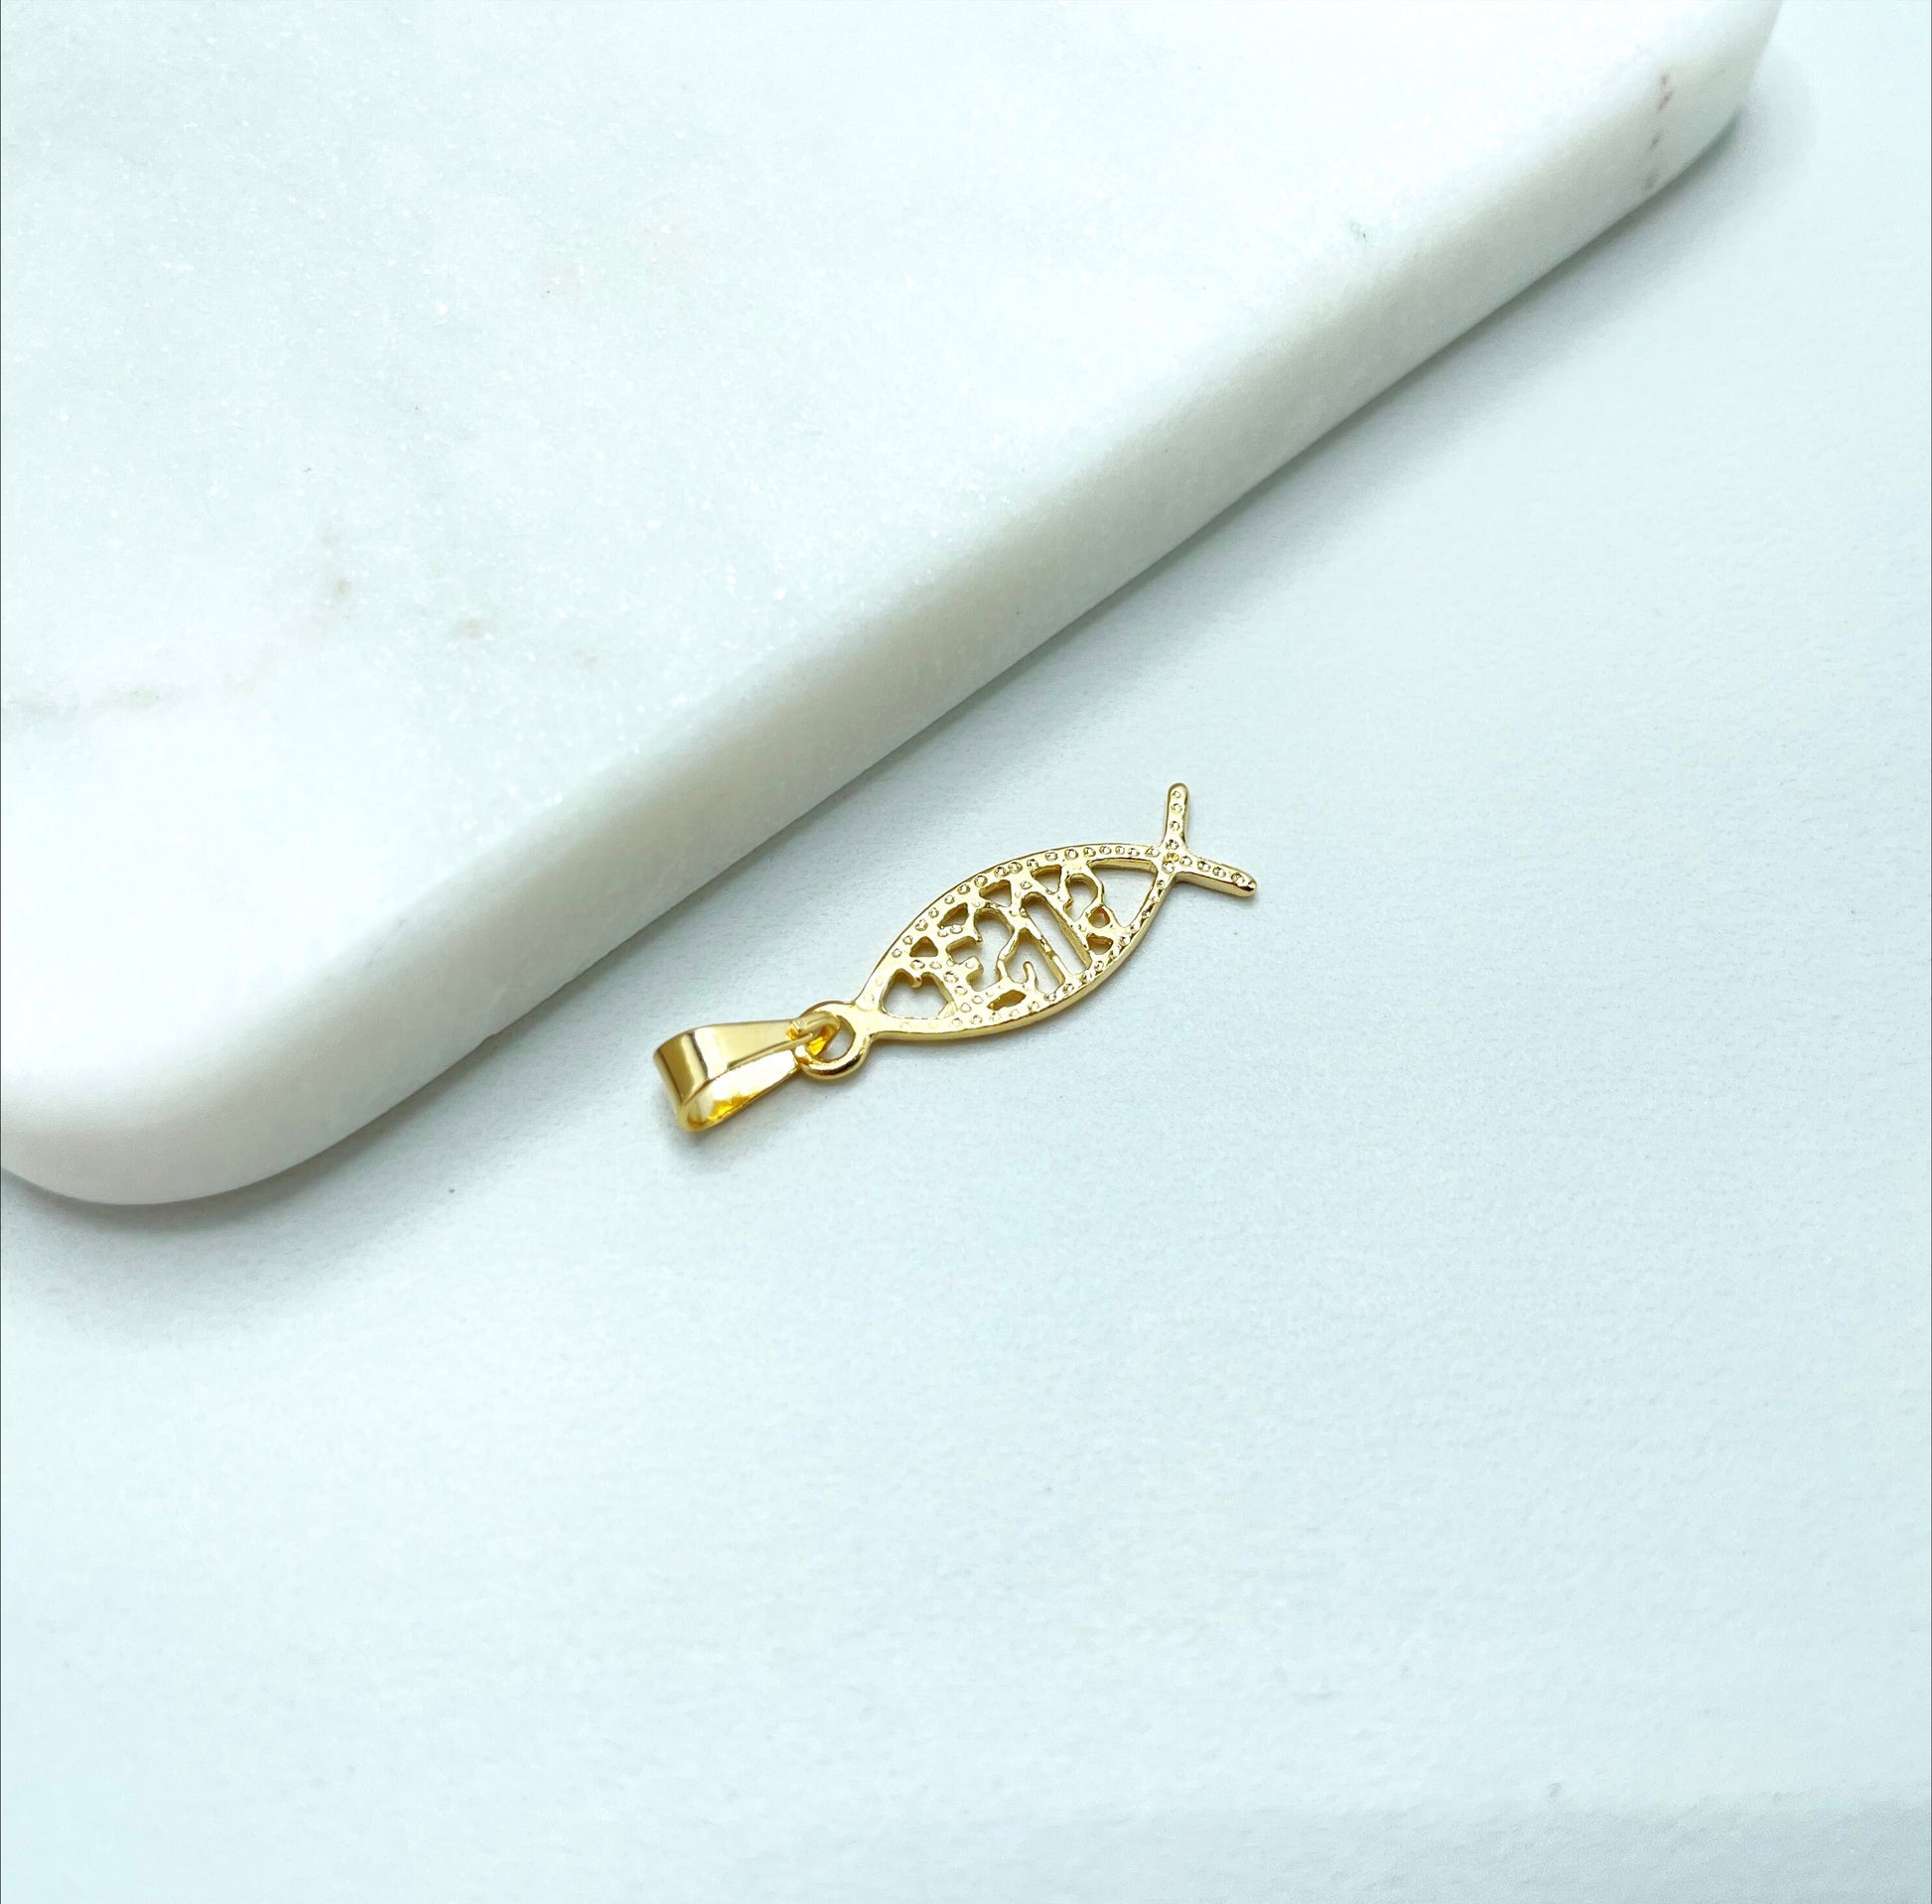 18k Gold Filled Fish Shape with "JESUS" Name Description inside Charm Pendant, Religious Jewelry, Wholesale Jewelry Making Supplies